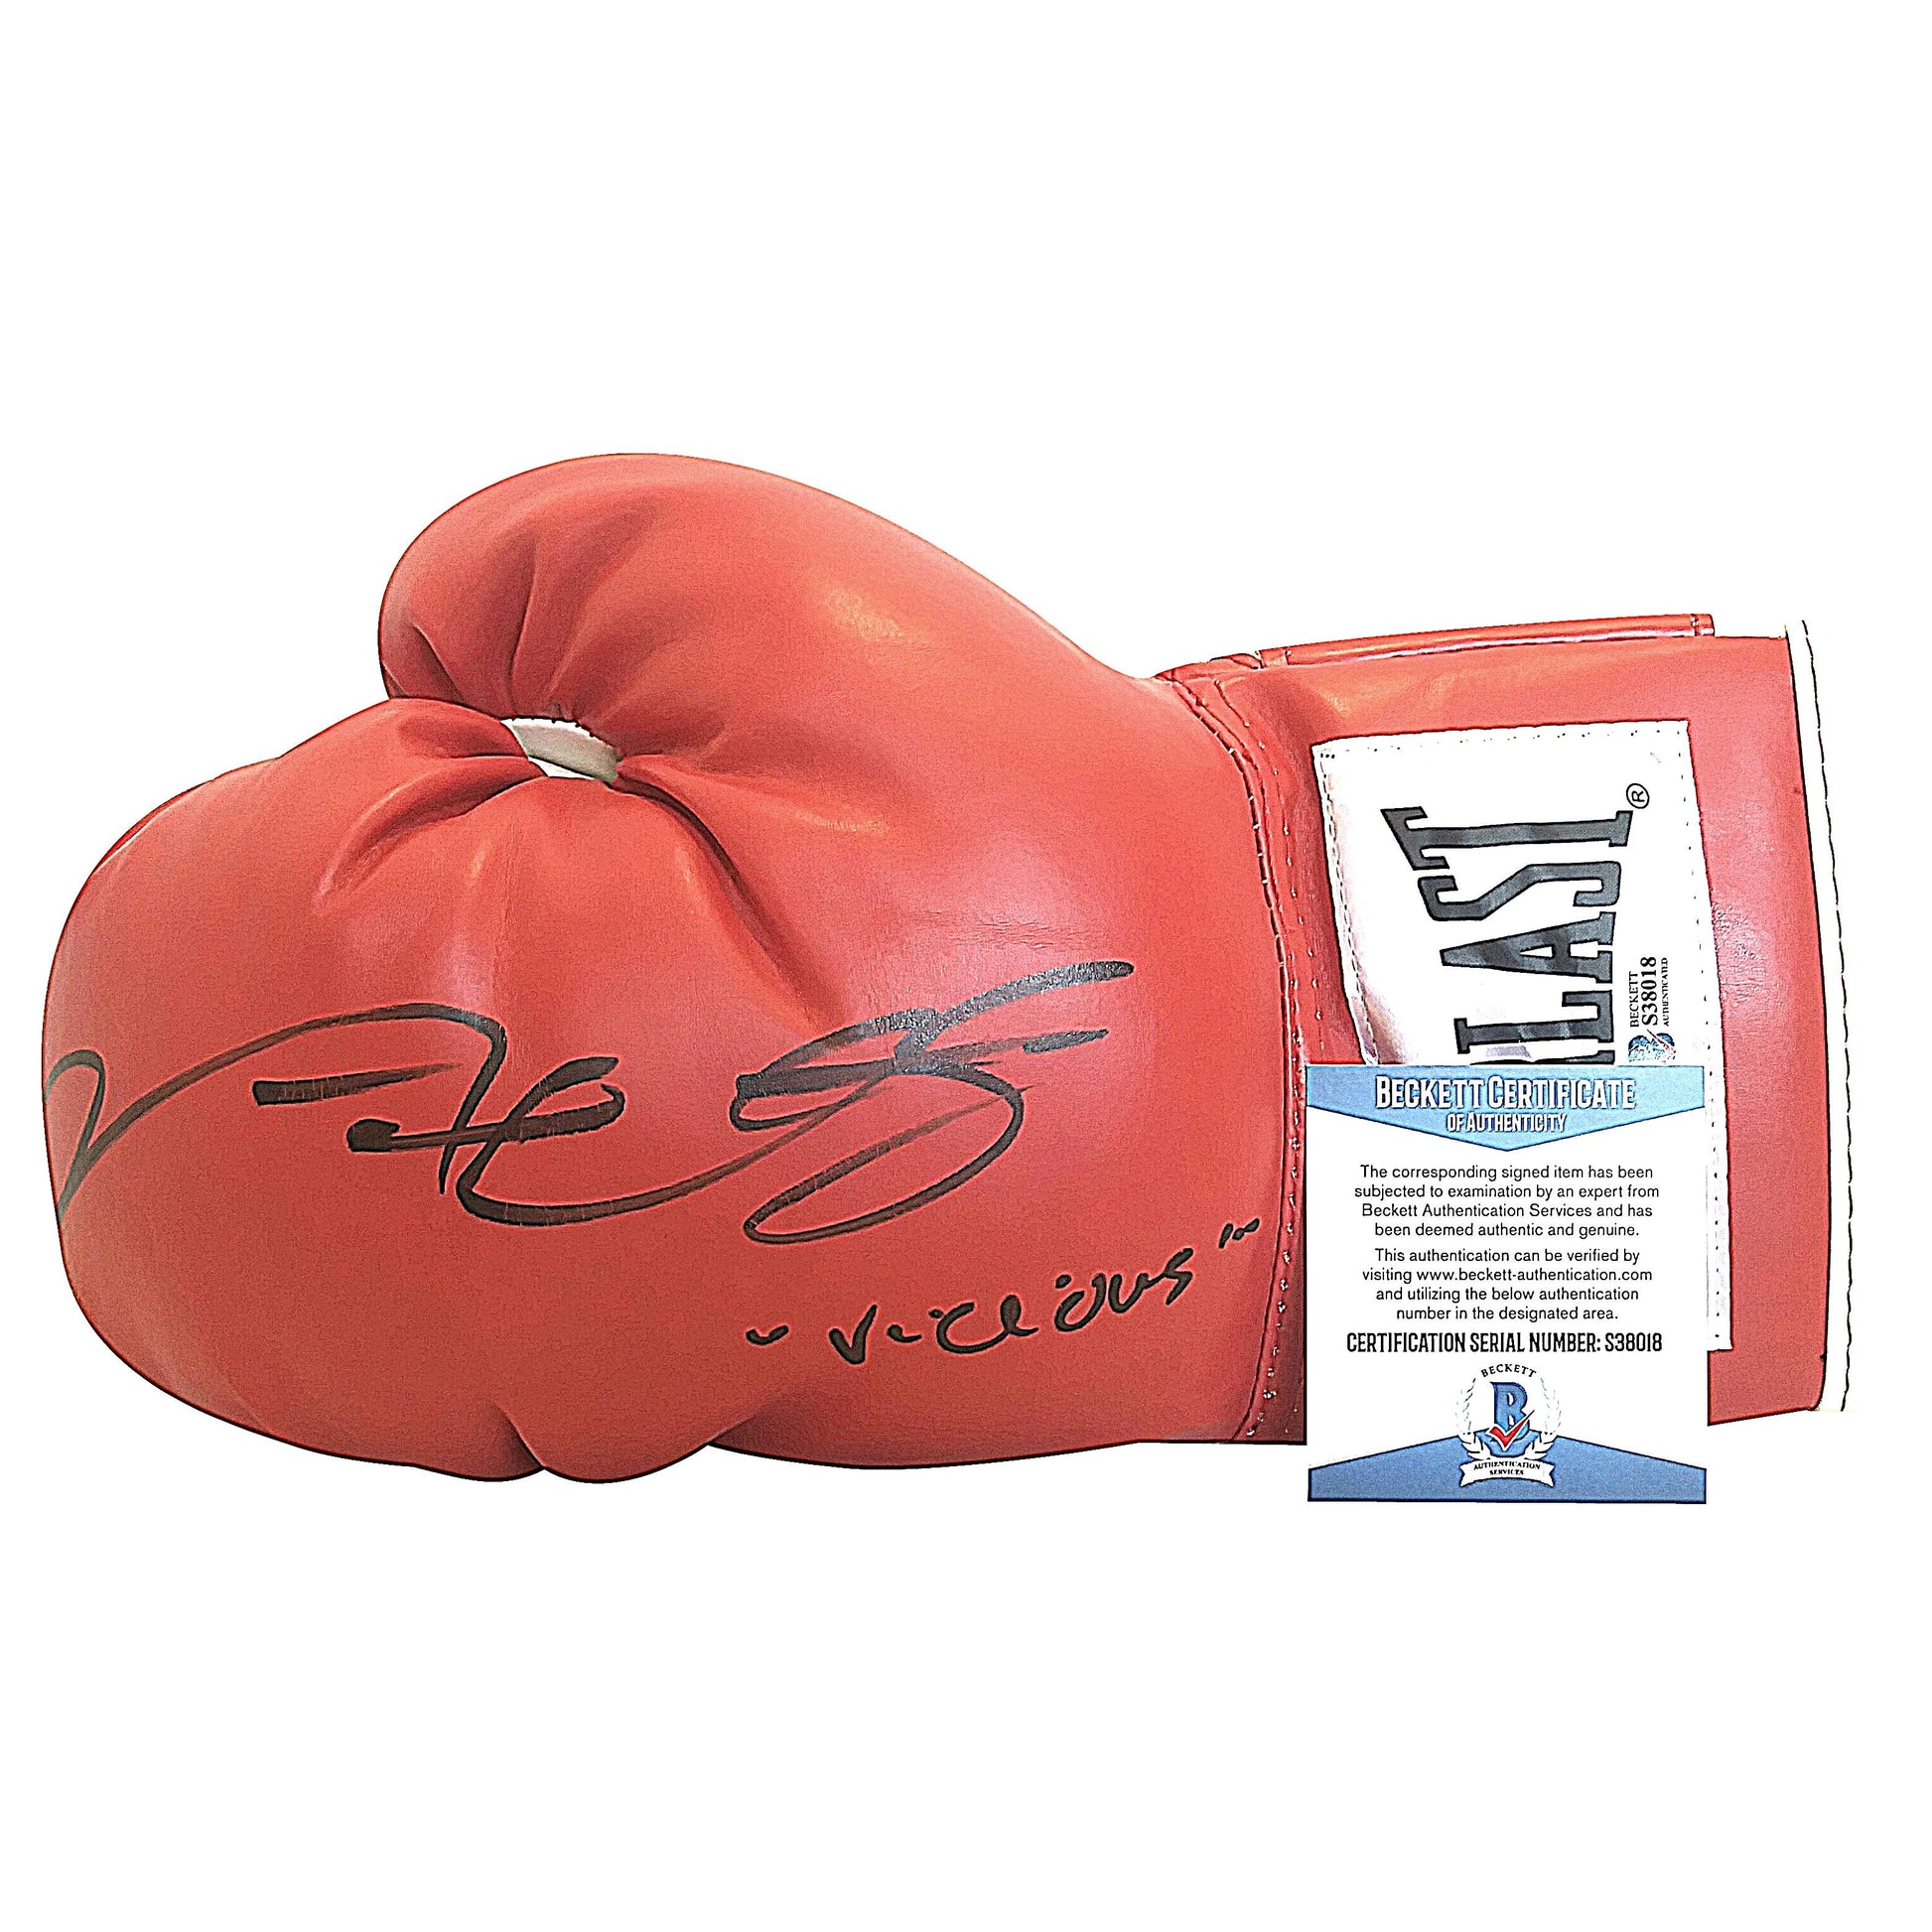 Boxing Gloves-Autographed - Victor Ortiz Signed Everlast Red Boxing Glove W/ Inscription - Beckett BAS 201a